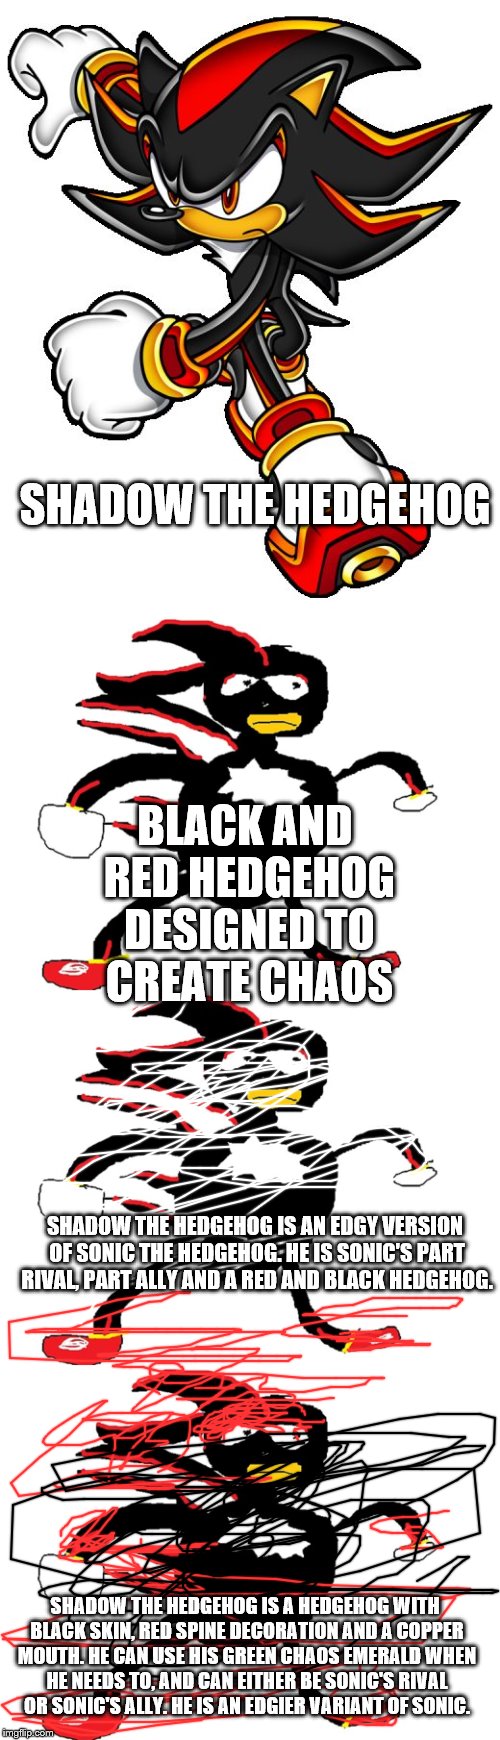 Better Information, Worse Drawing | SHADOW THE HEDGEHOG; BLACK AND RED HEDGEHOG DESIGNED TO CREATE CHAOS; SHADOW THE HEDGEHOG IS AN EDGY VERSION OF SONIC THE HEDGEHOG. HE IS SONIC'S PART RIVAL, PART ALLY AND A RED AND BLACK HEDGEHOG. SHADOW THE HEDGEHOG IS A HEDGEHOG WITH BLACK SKIN, RED SPINE DECORATION AND A COPPER MOUTH. HE CAN USE HIS GREEN CHAOS EMERALD WHEN HE NEEDS TO, AND CAN EITHER BE SONIC'S RIVAL OR SONIC'S ALLY. HE IS AN EDGIER VARIANT OF SONIC. | image tagged in shadow the hedgehog,shadew,sanic,drawings,information,memes | made w/ Imgflip meme maker